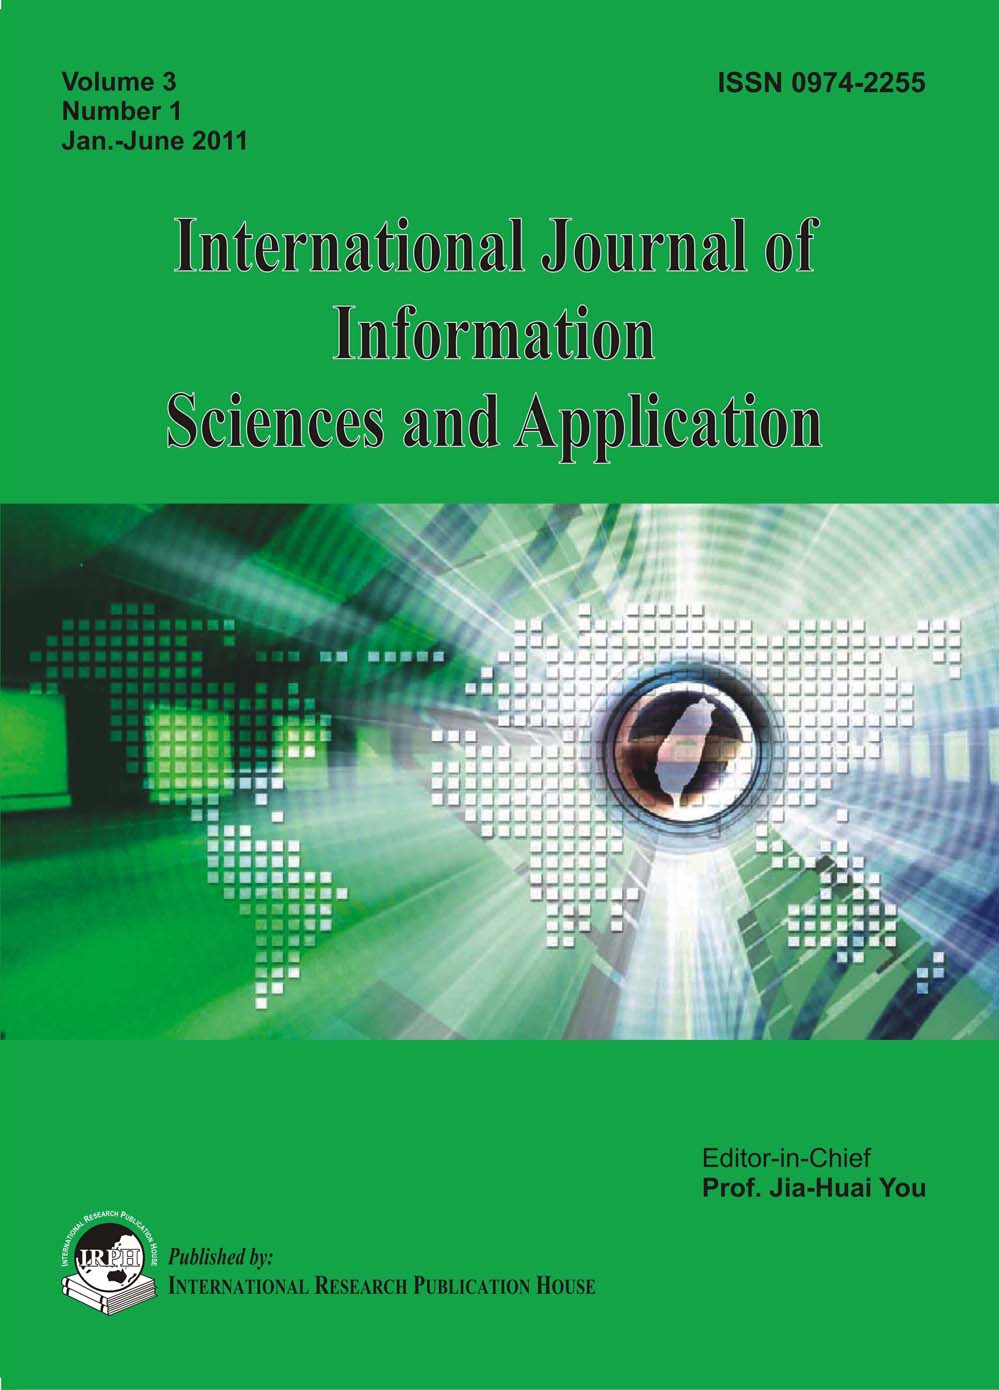 International Journal of Information Sciences and Application